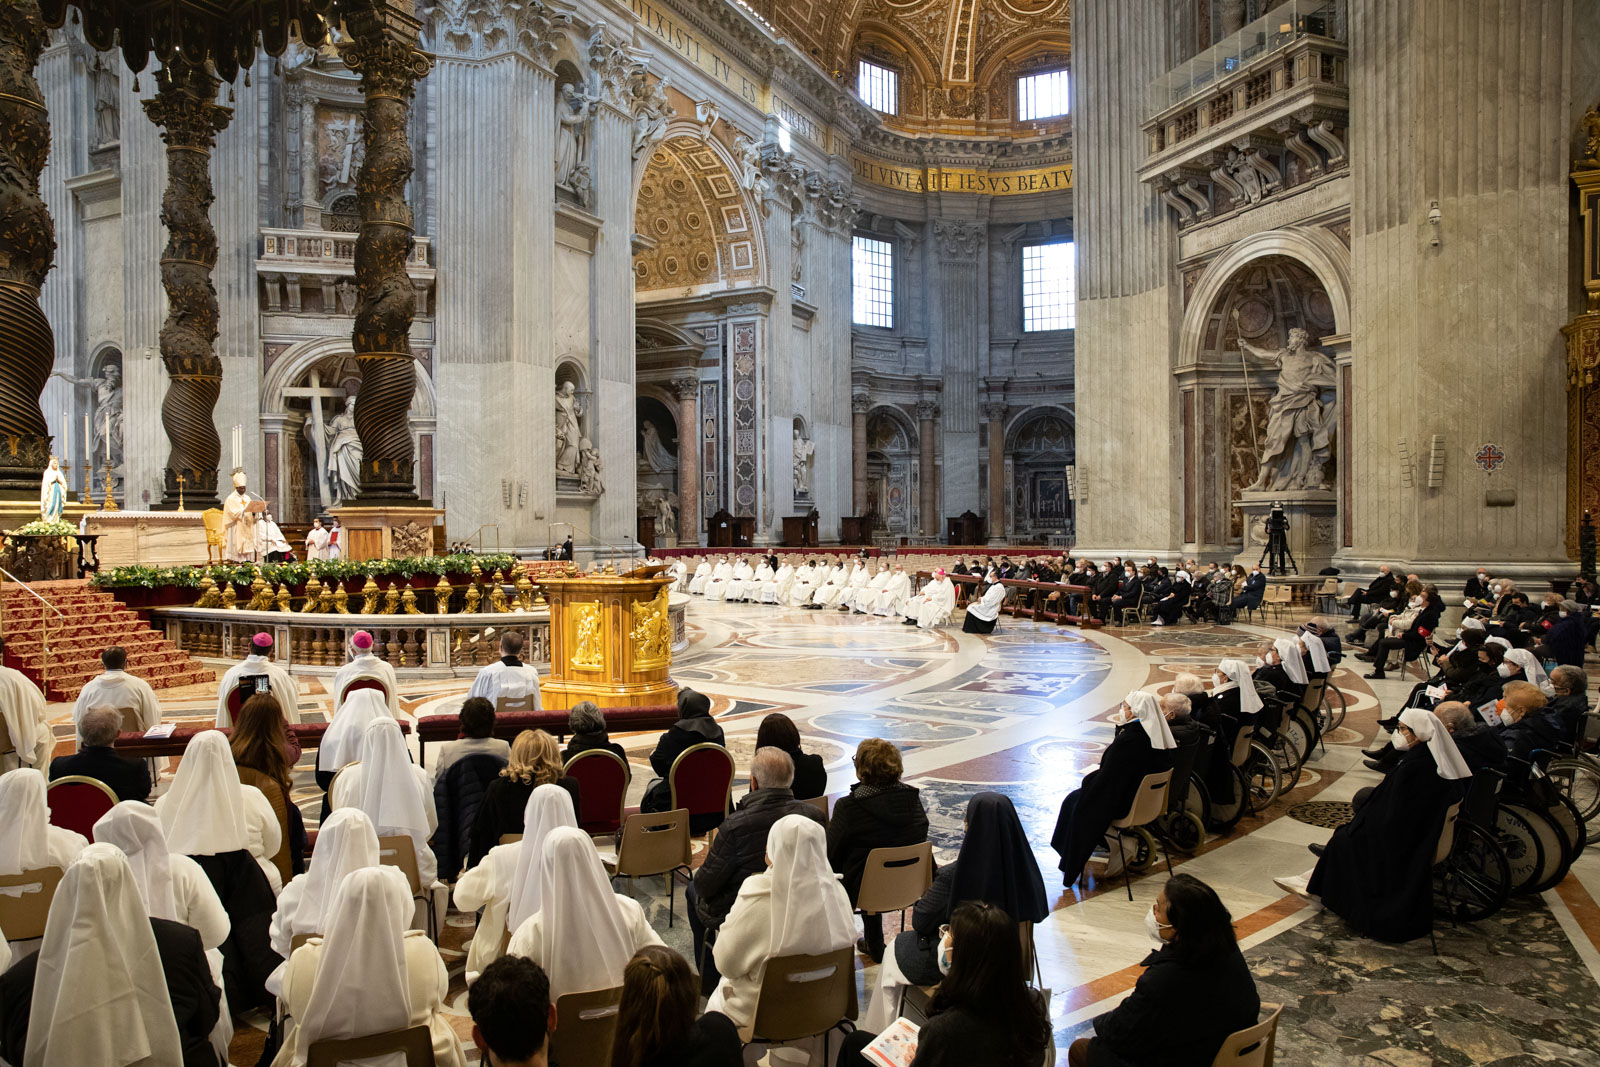 Mass in St. Peter’s Basilica for the 30th World Day of the Sick